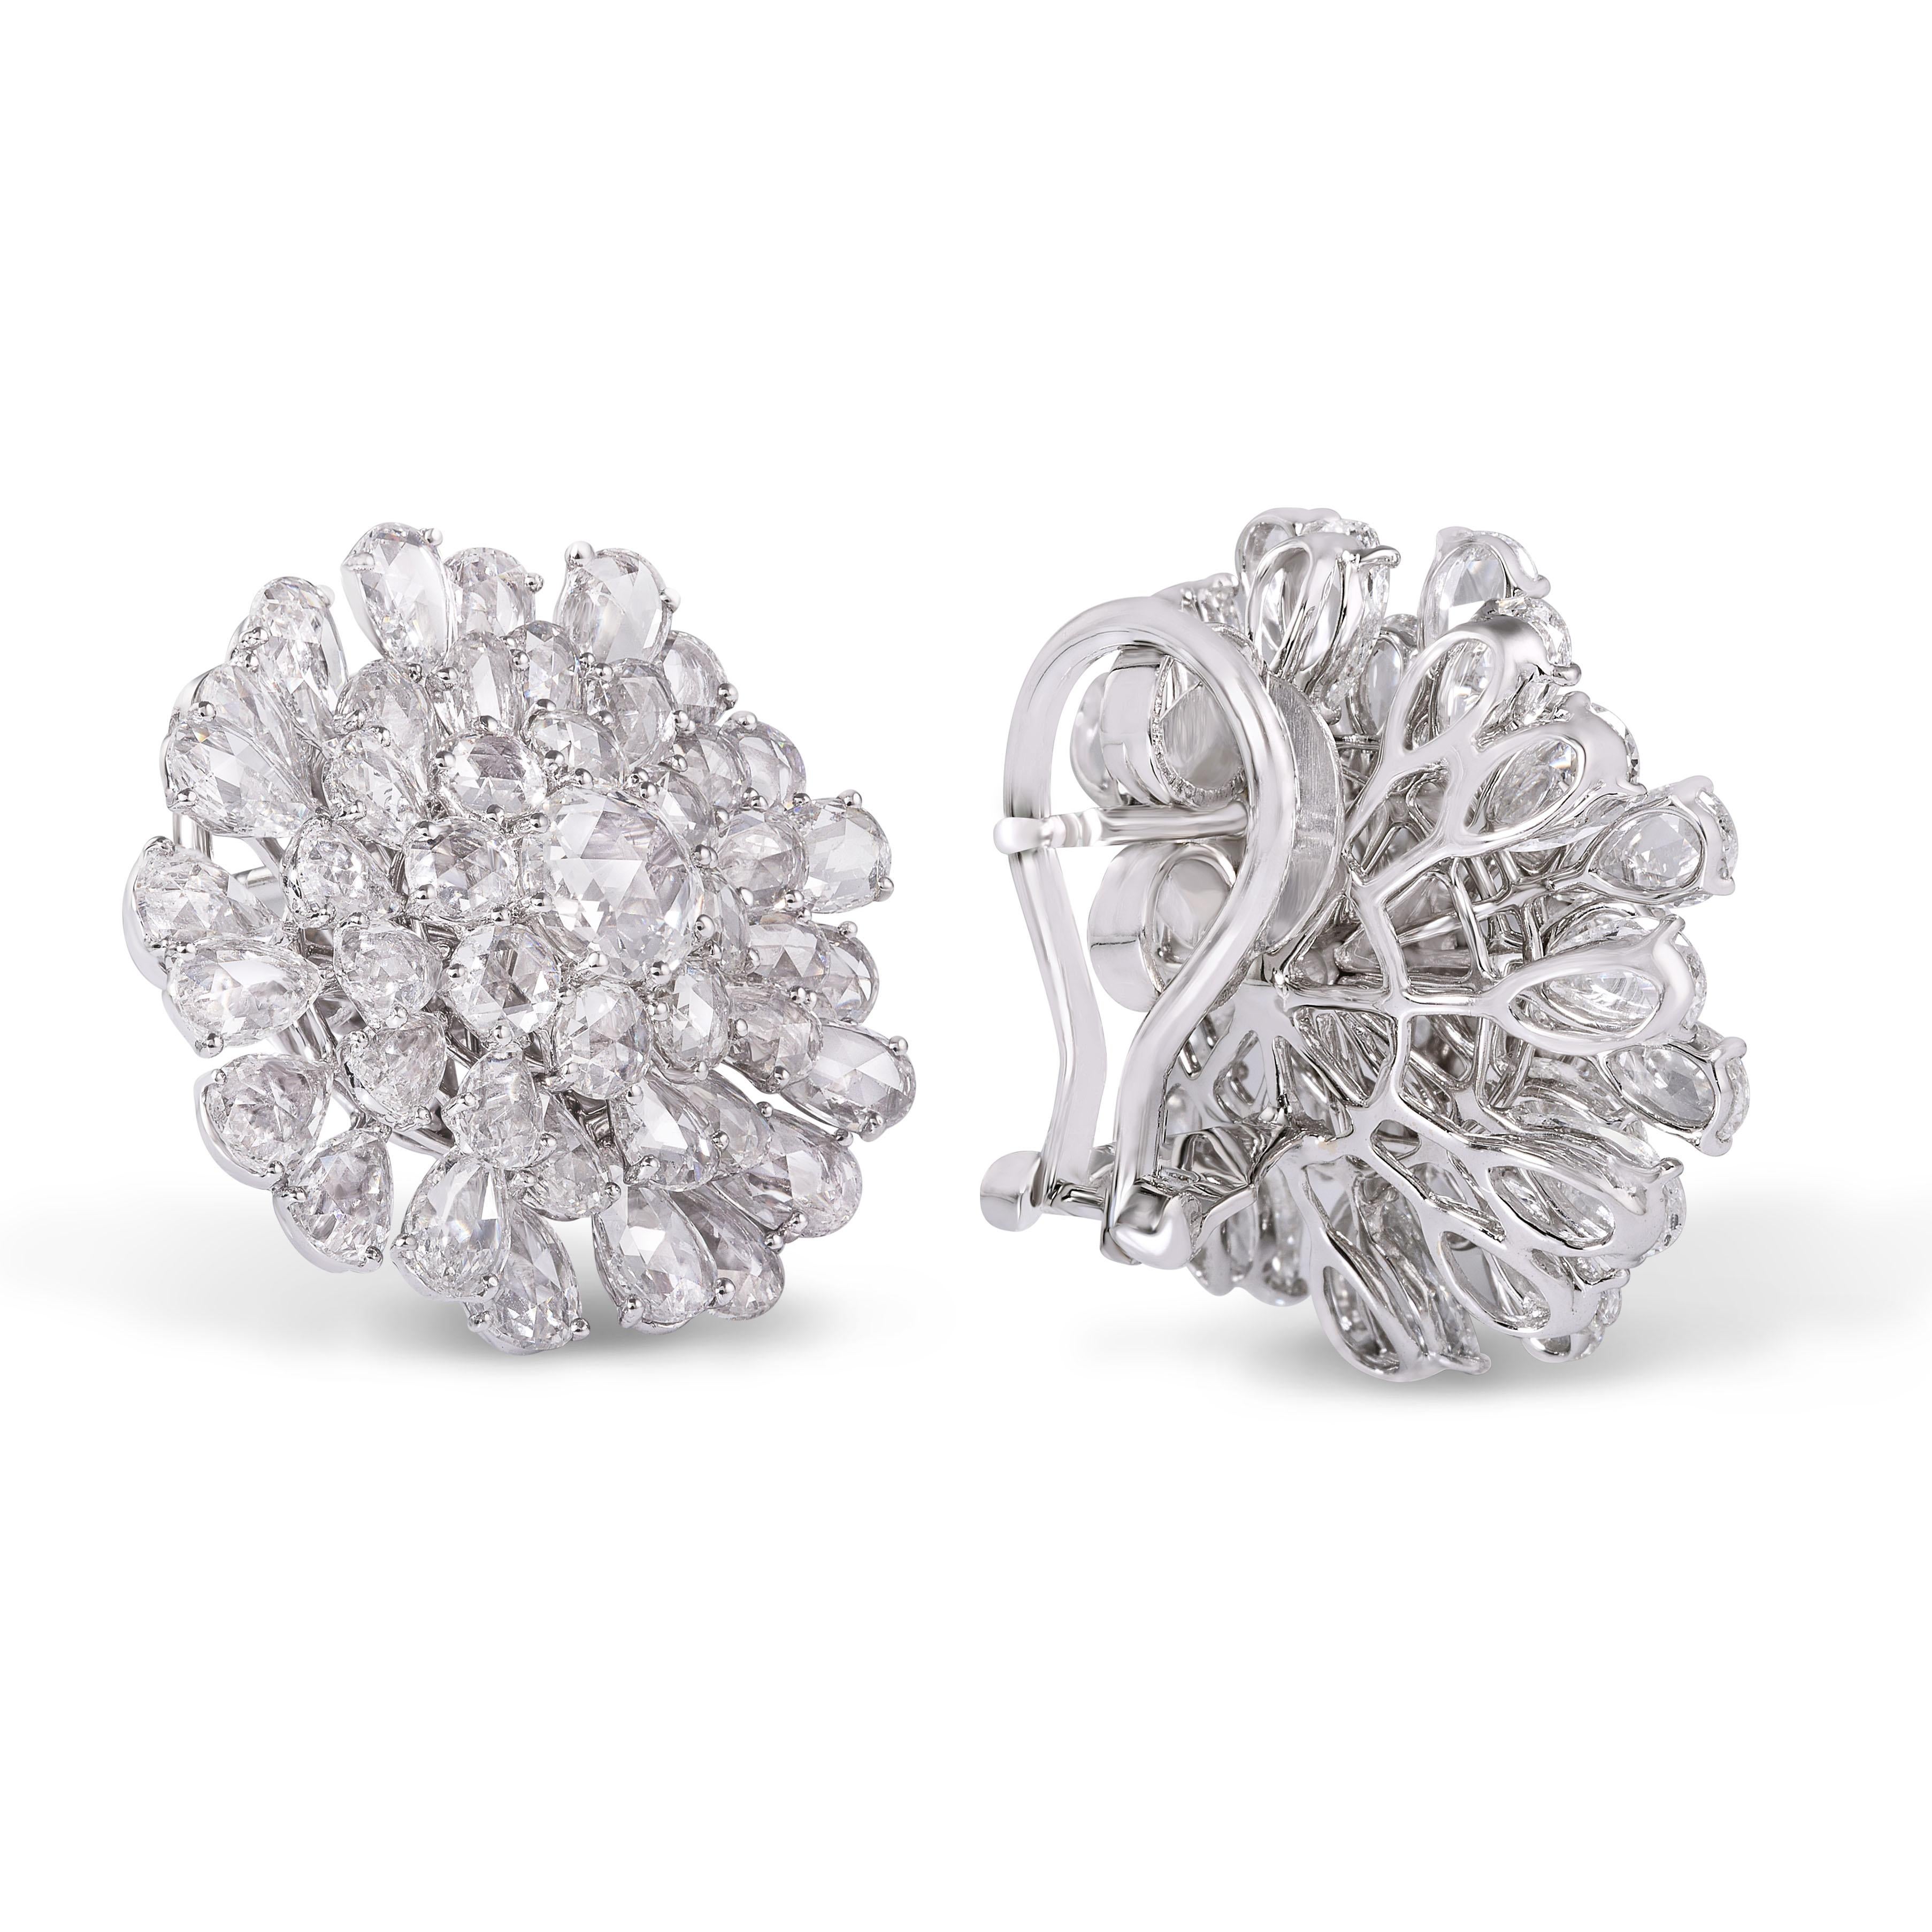 Rarever brings the Floral collection taking the inspiration from the beauty and uniqueness of the flower. The earring is crafted with 89 Rose cut diamonds set in step setting to attain the floral form of the earring, surrounding the Round Rose cut